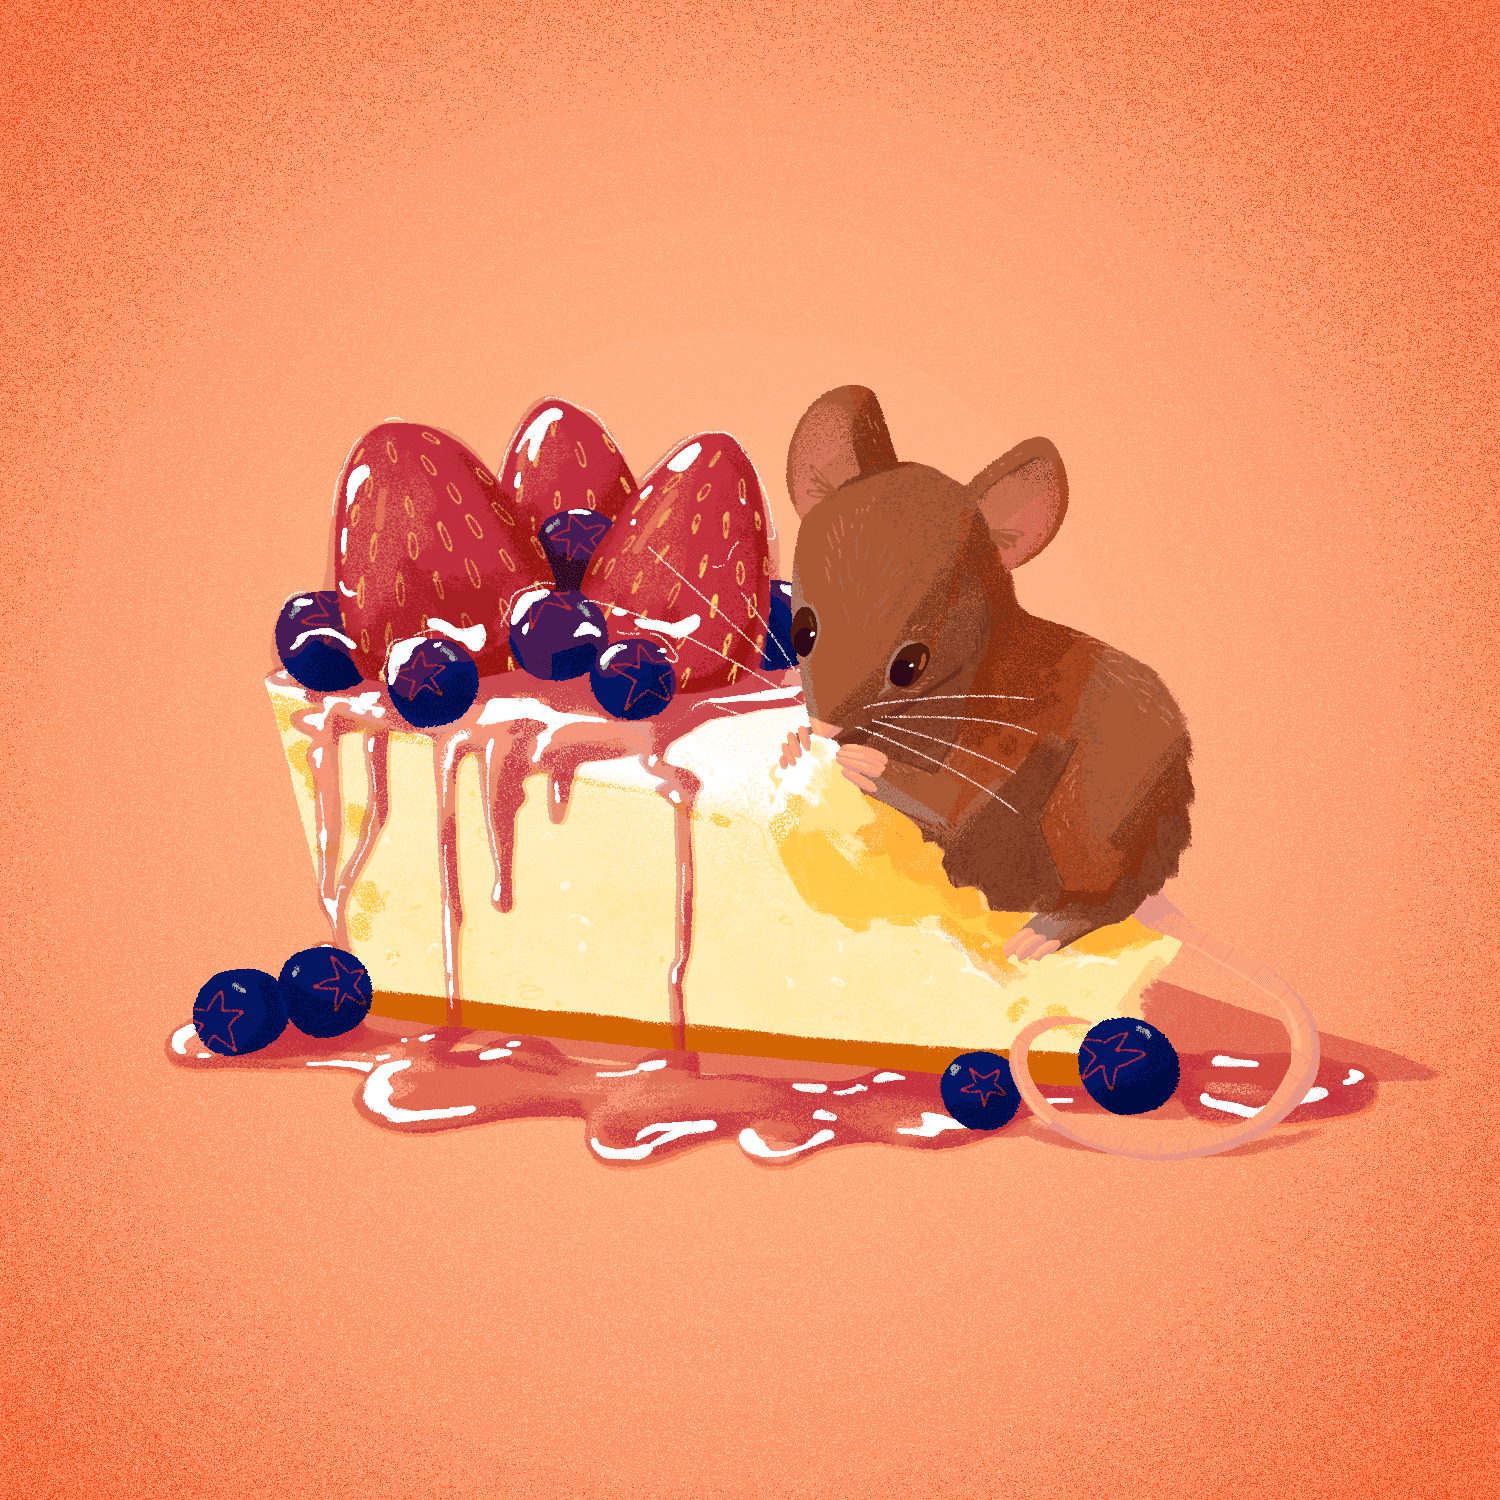 Thumbnail for "This Is Your Brain On Cheesecake".